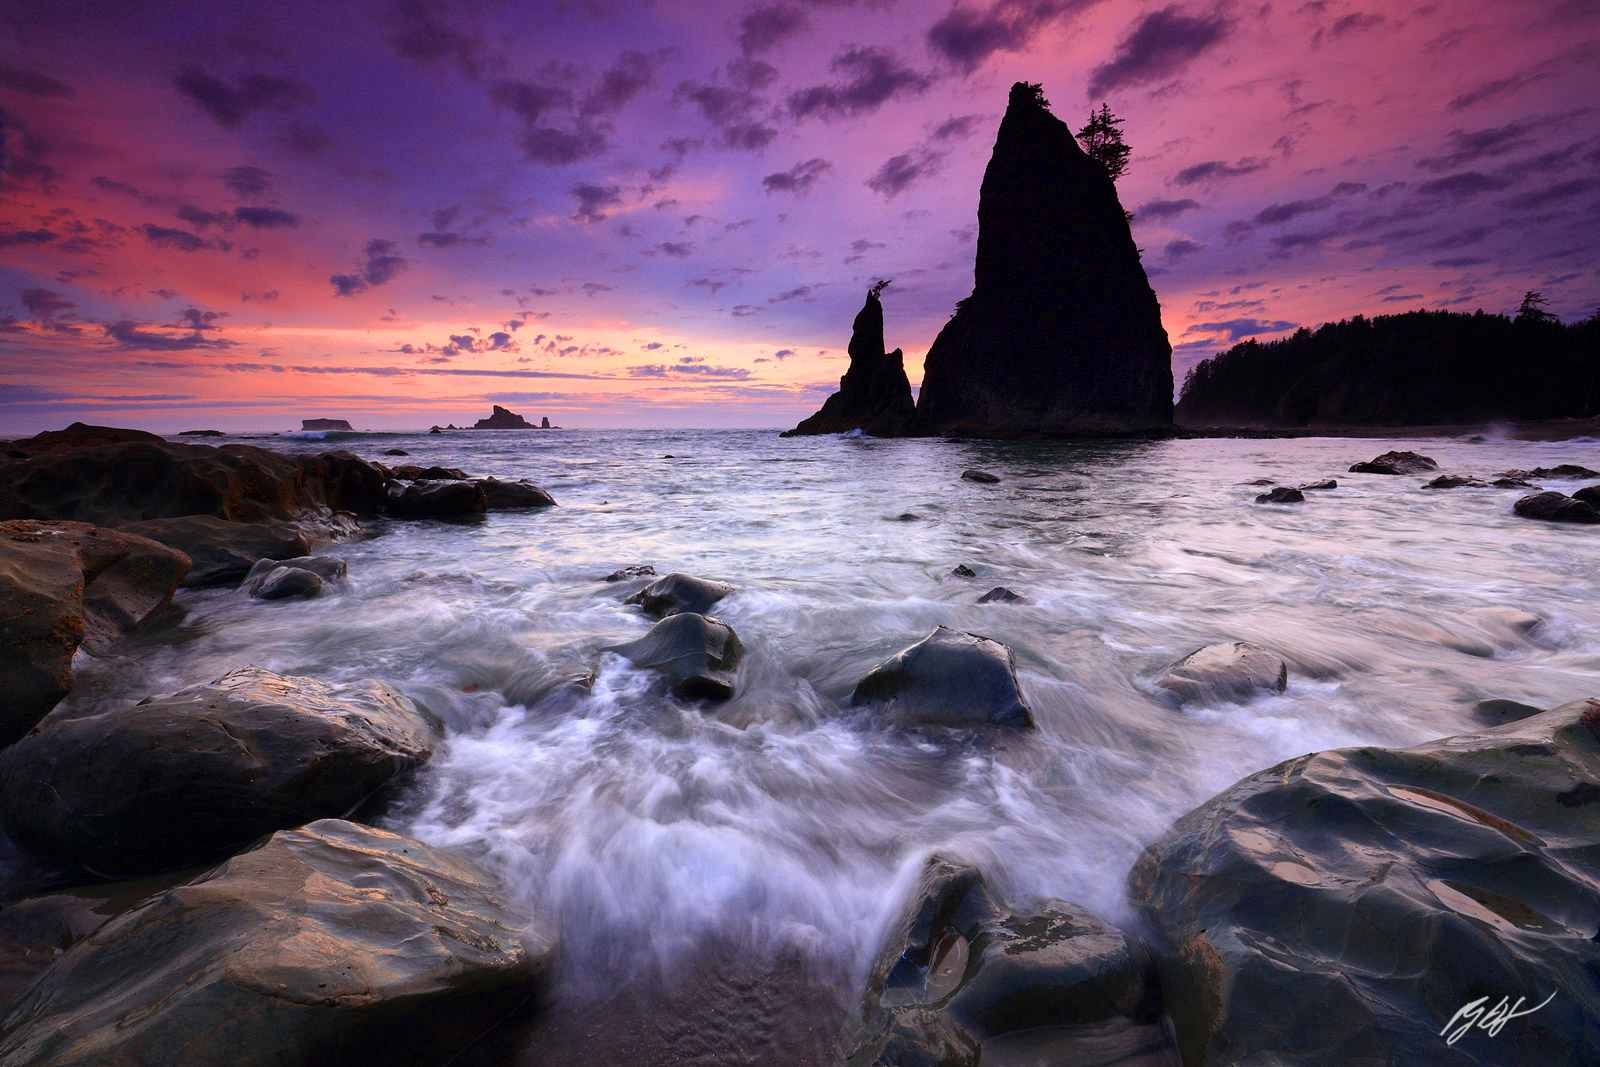 Sunset Surf and Split Rock on Rialto Beach in Olympic National Park in Washington